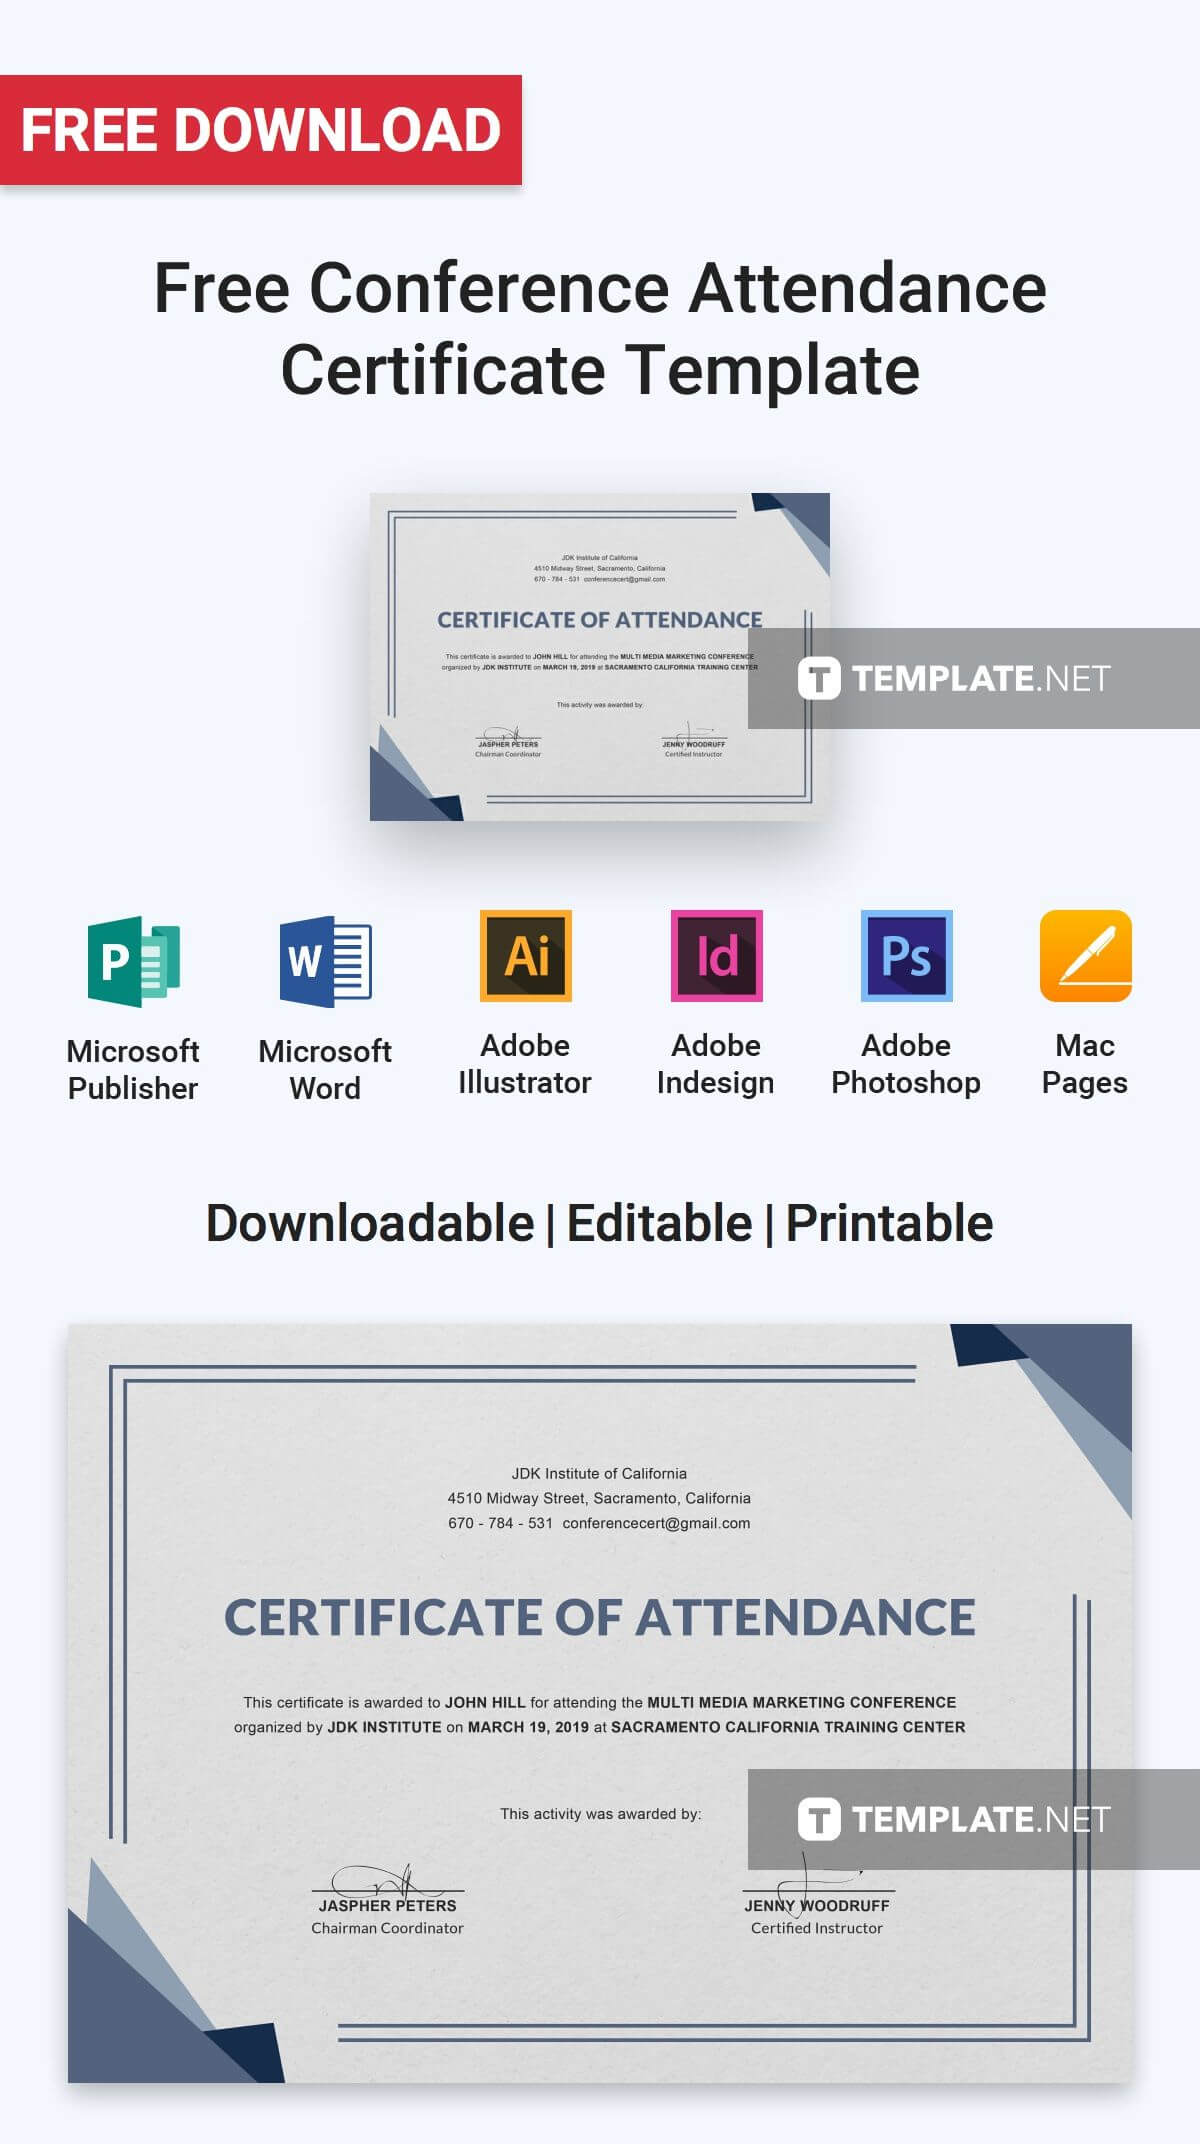 Free Conference Attendance Certificate | Certificate With Conference Participation Certificate Template